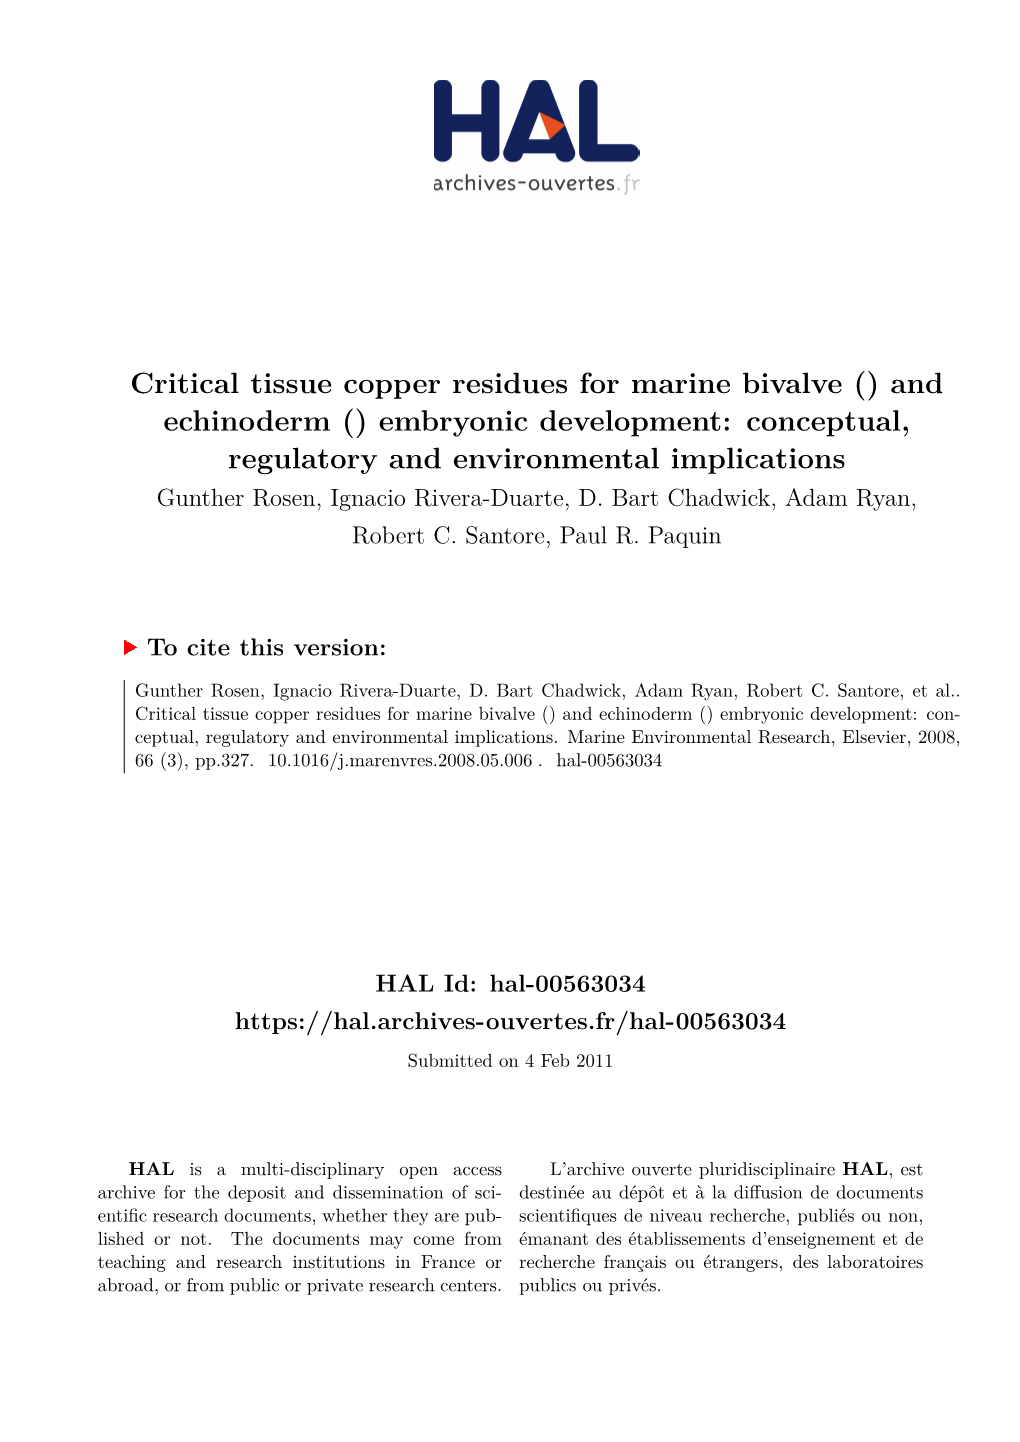 Critical Tissue Copper Residues for Marine Bivalve () and Echinoderm